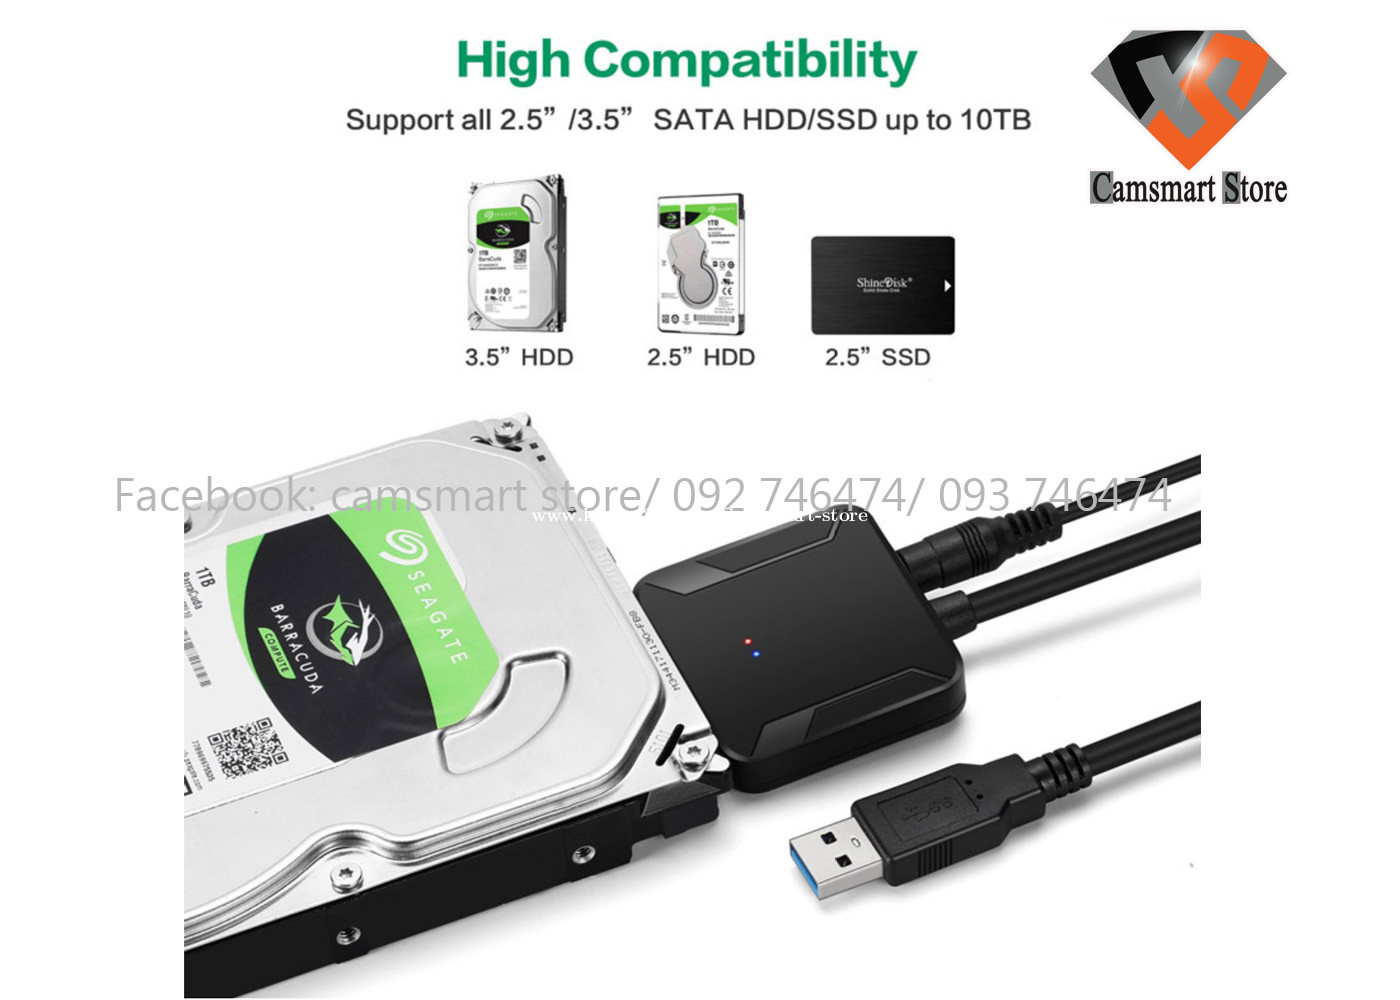 behind Miss support USB 3.0 To SATA 3 Cable SATA To USB Adapter Convert Cables Support 2.5/3.5  Inch in Phnom Penh, Cambodia on Khmer24.com